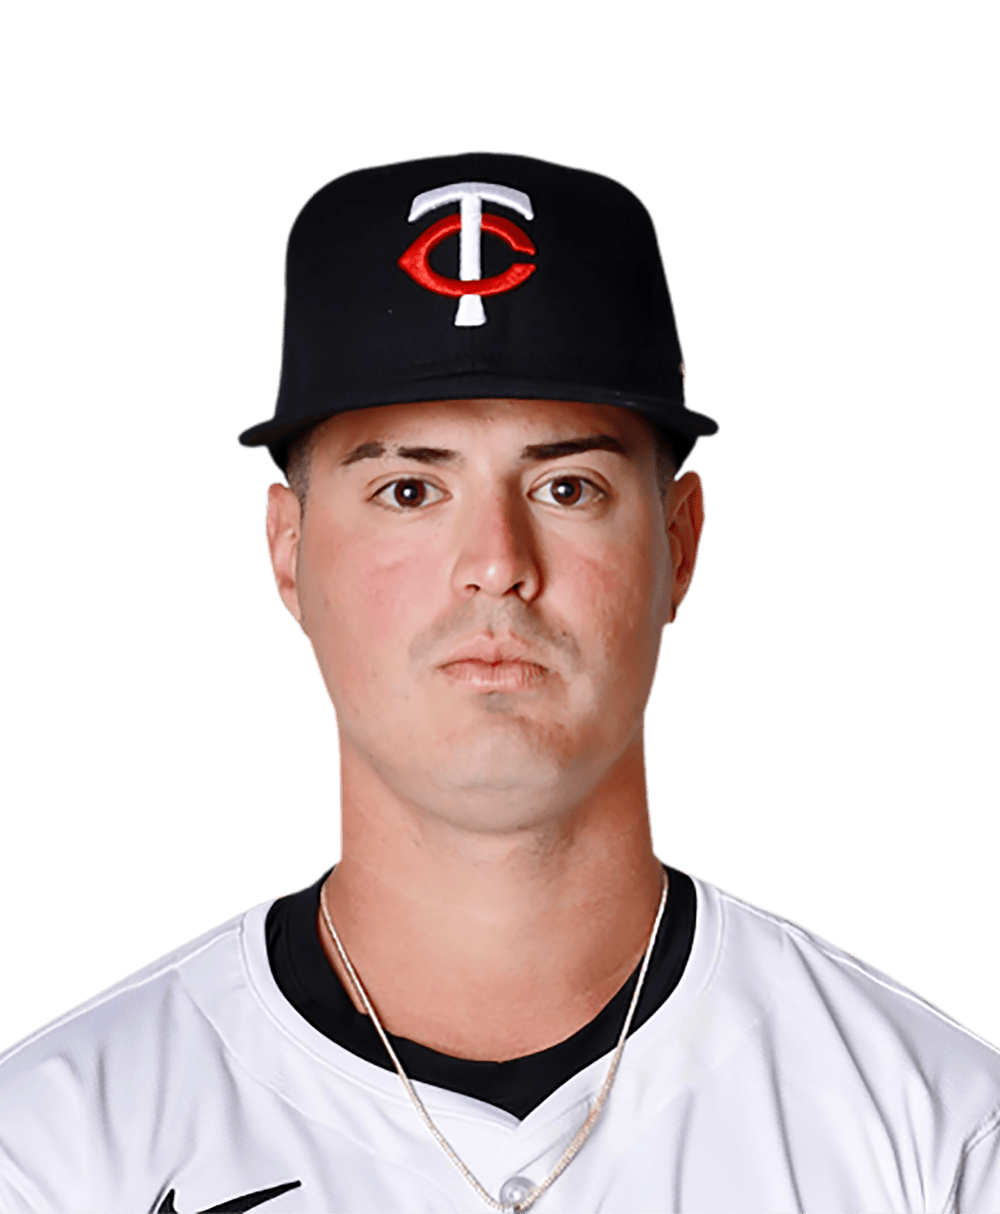 Kyle Farmer reinstated to Twins roster after pitch injury